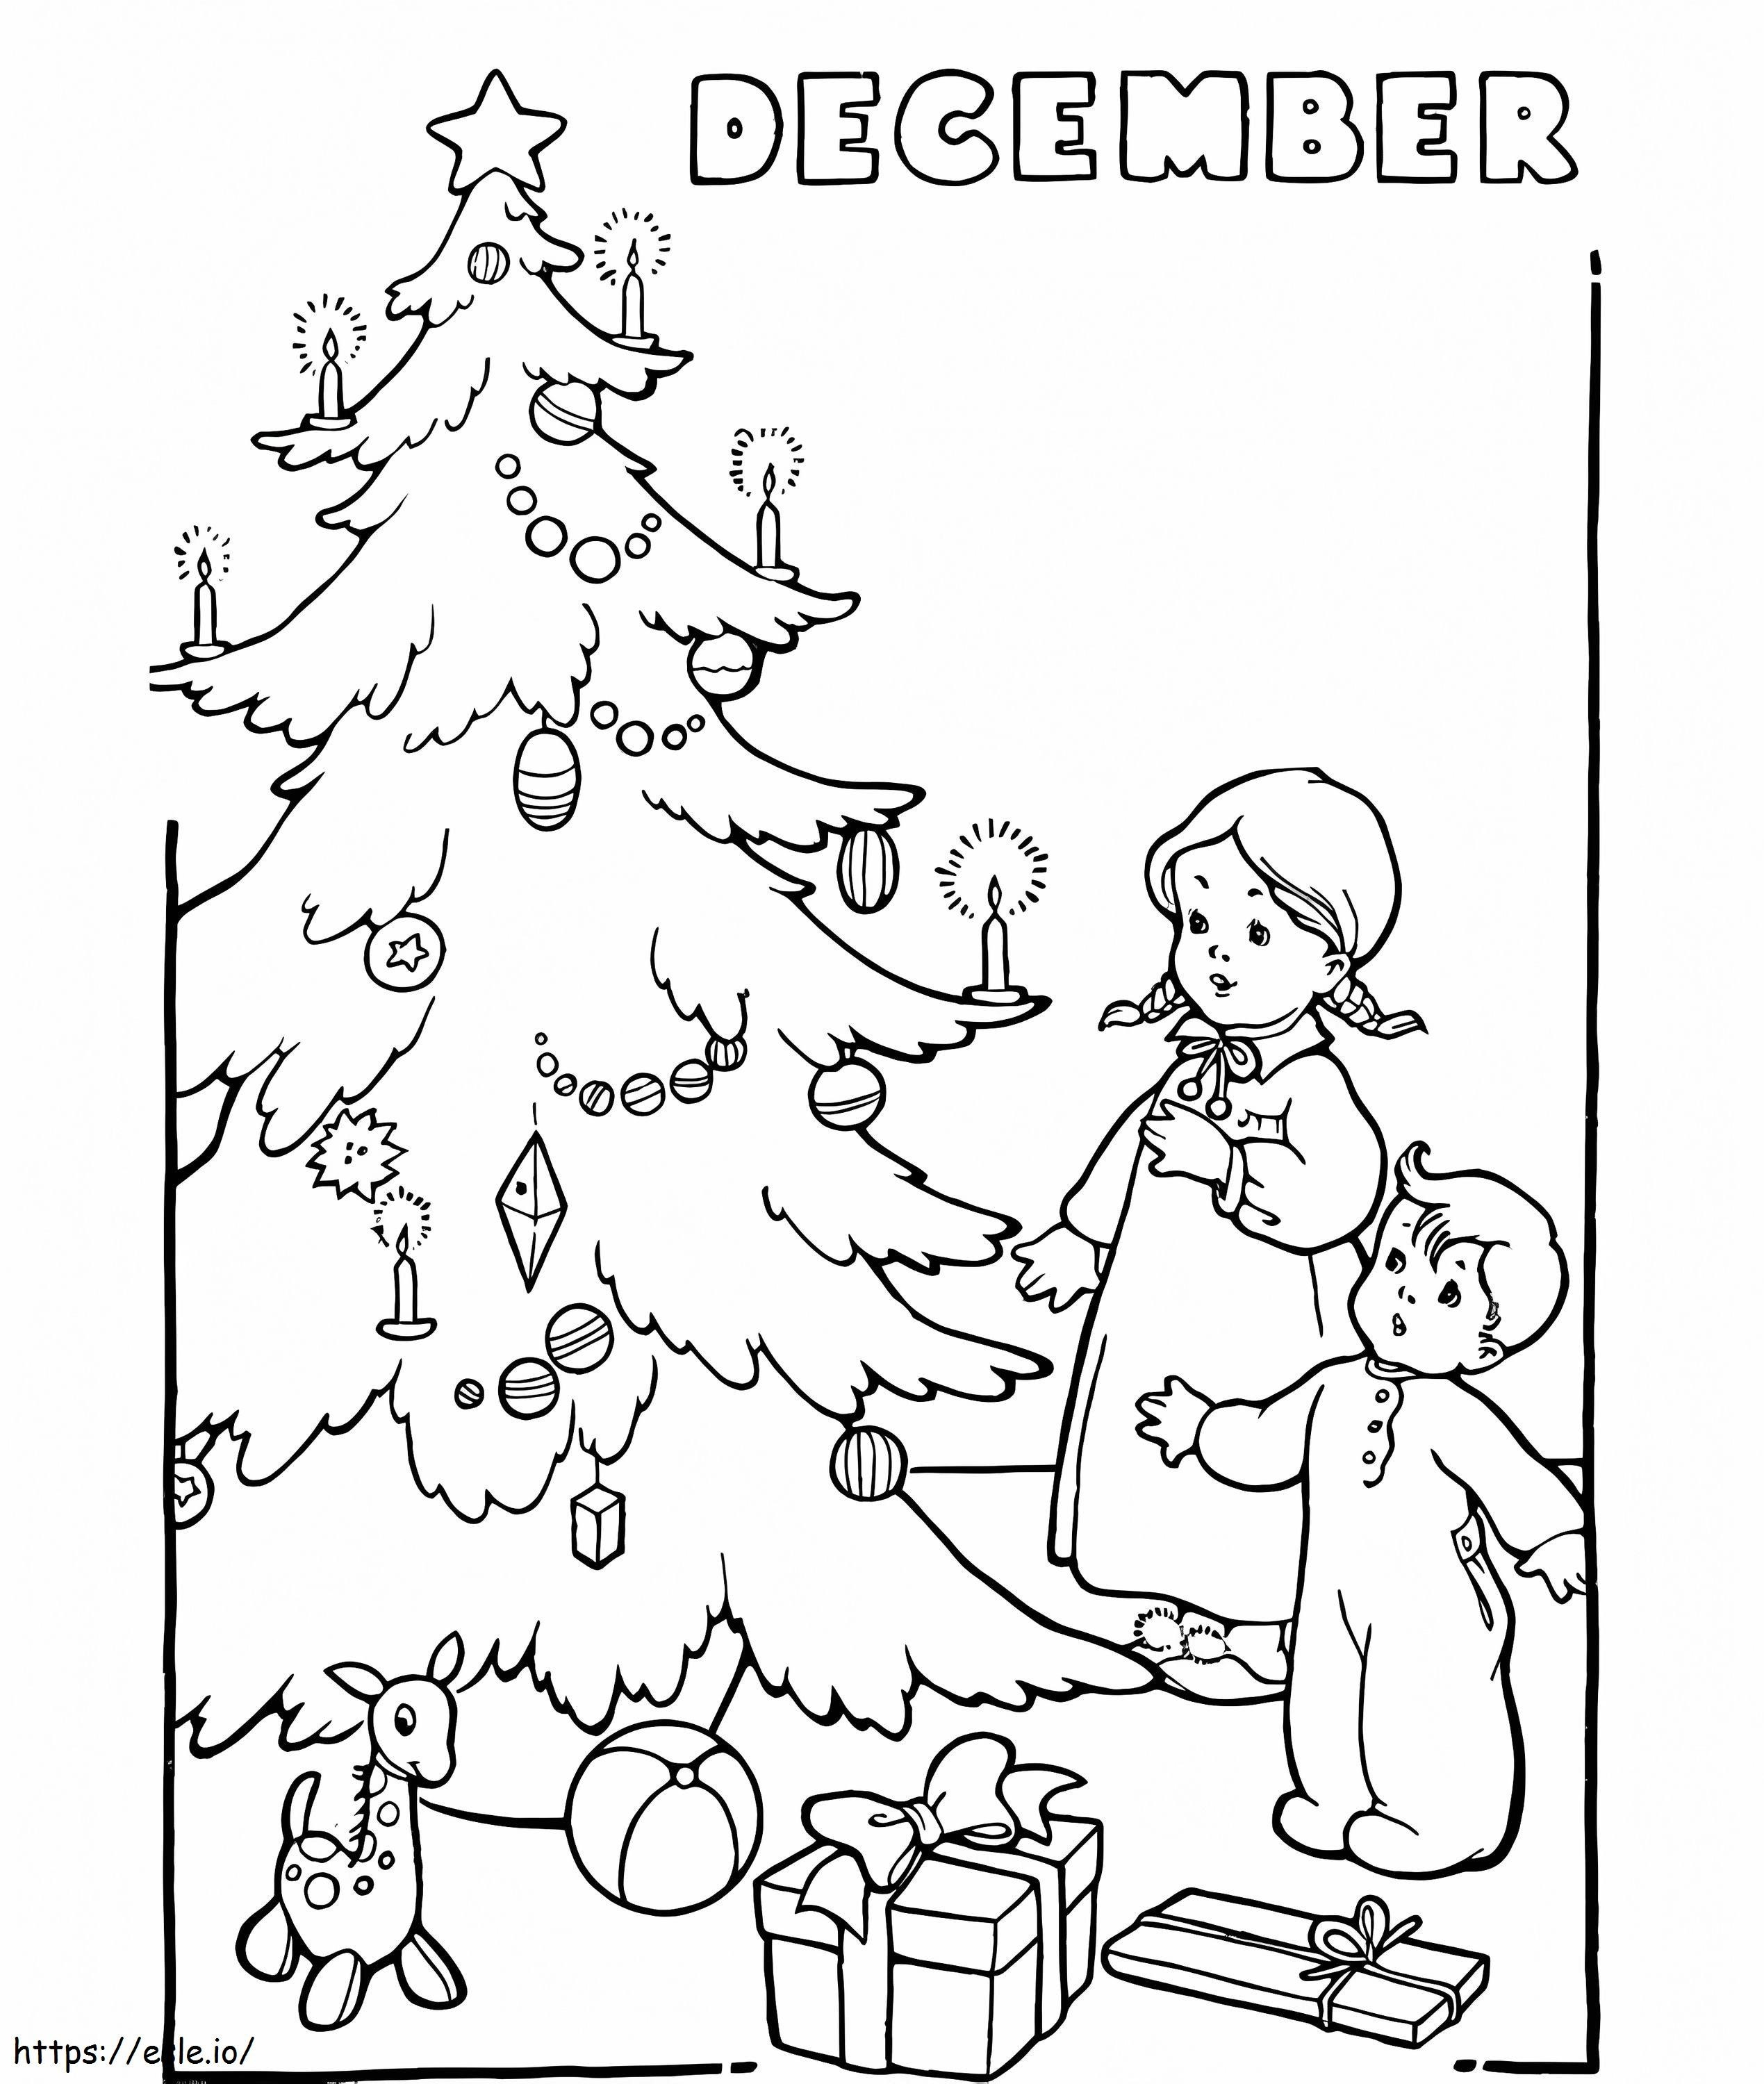 December 6 coloring page